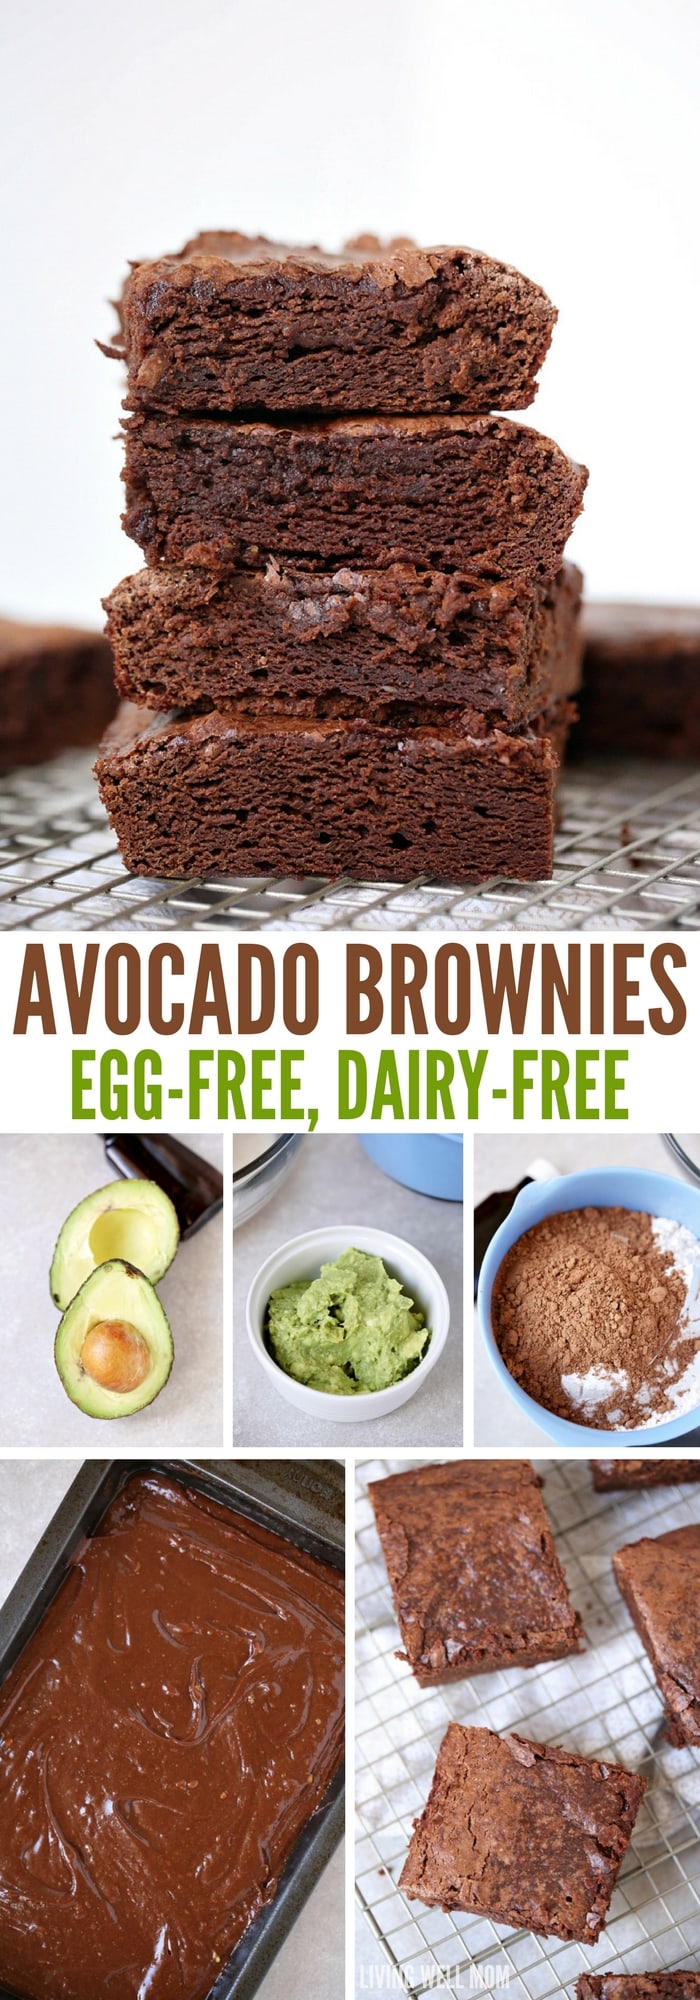 Super-Moist Avocado Brownies are mouthwateringly delicious and so easy to make! Kids love this egg-free brownie recipe too; your whole family will enjoy this chocolate dessert. #brownies #avocado #eggfree #dessert #easyrecipe #chocolaterecipes